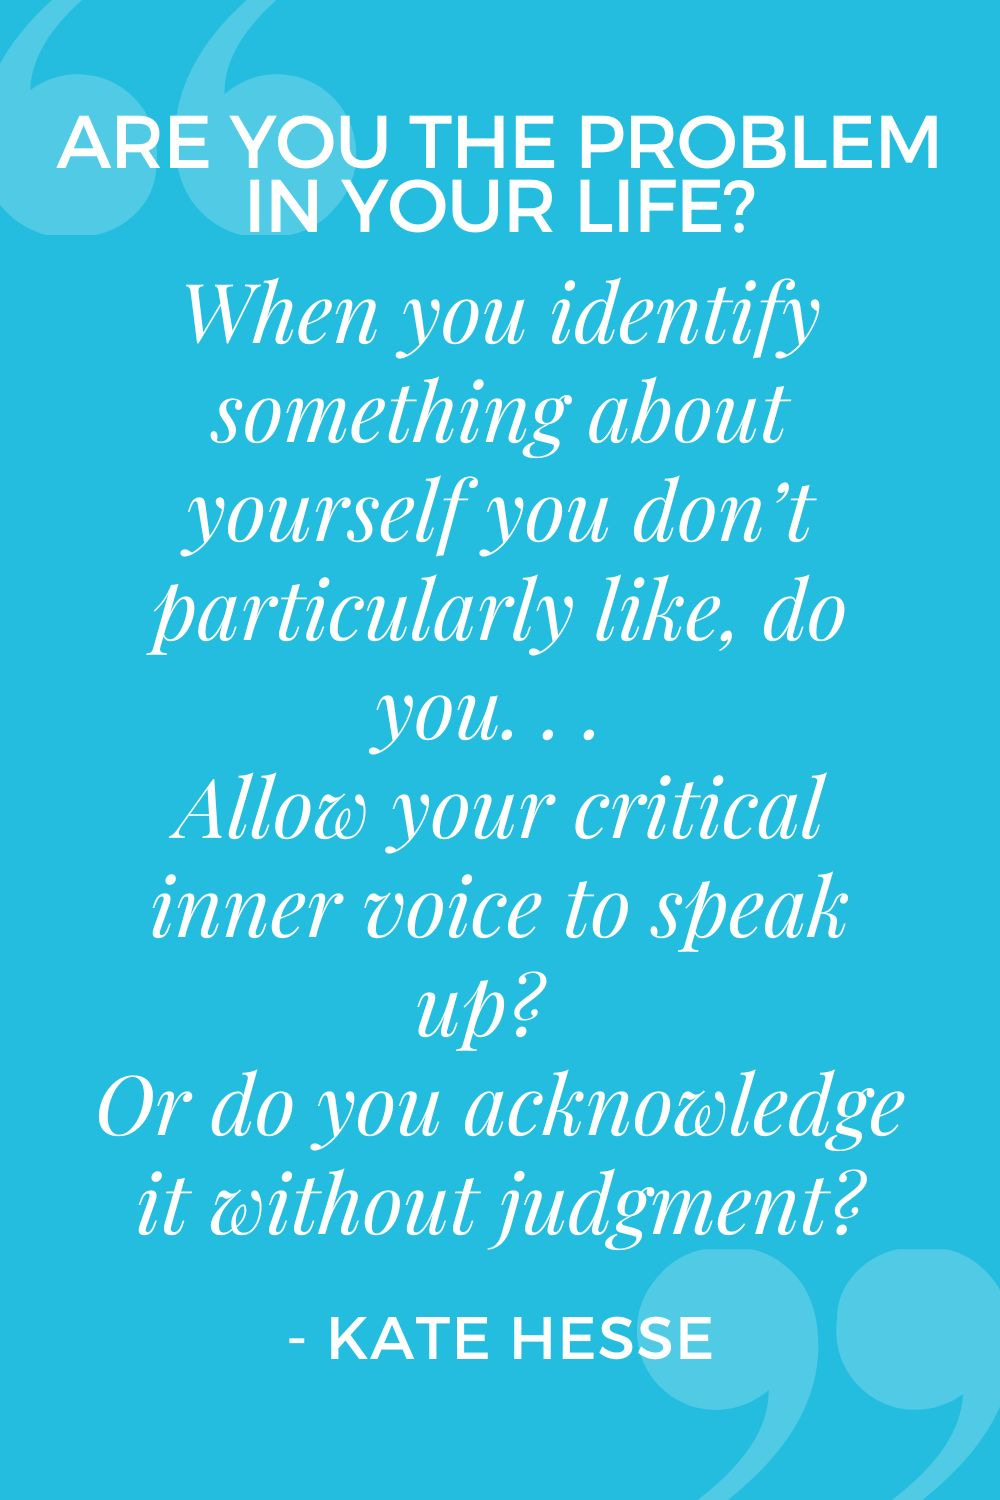 When you identify something about yourself you don't particularly like, do you. . . Allow your critical inner voice to speak up? Or do you acknowledge it without judgment?